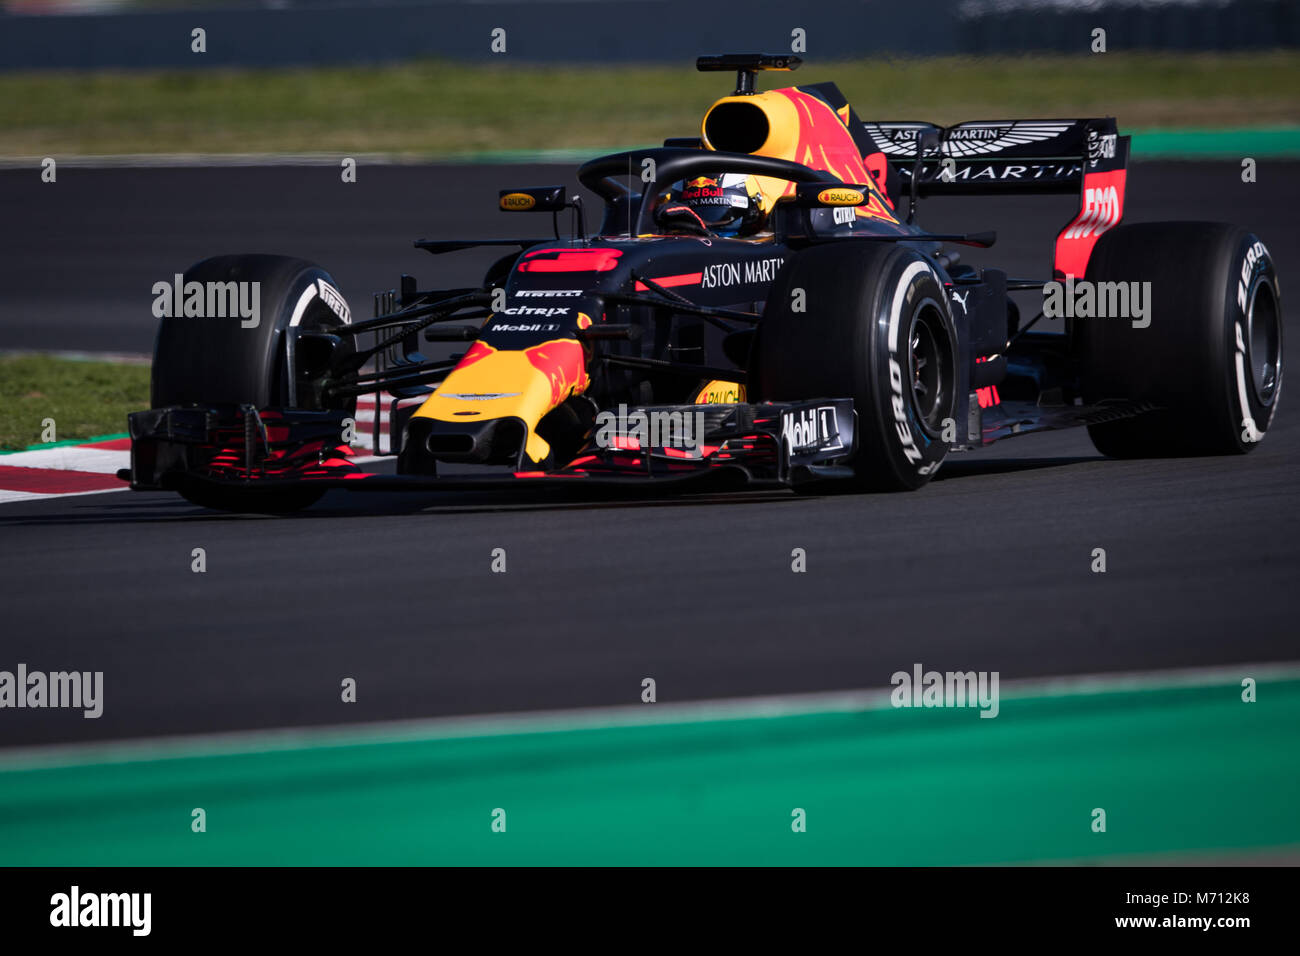 Montmelo, Catalonia, Spain. 7th Mar, 2018. Daniel Ricciardo of RedBull Racing with Red Bull RB14 car during F1 Test Days in Montmelo circuit. Credit:  MA 6316.jpg/SOPA Images/ZUMA Wire/Alamy Live News Stock Photo